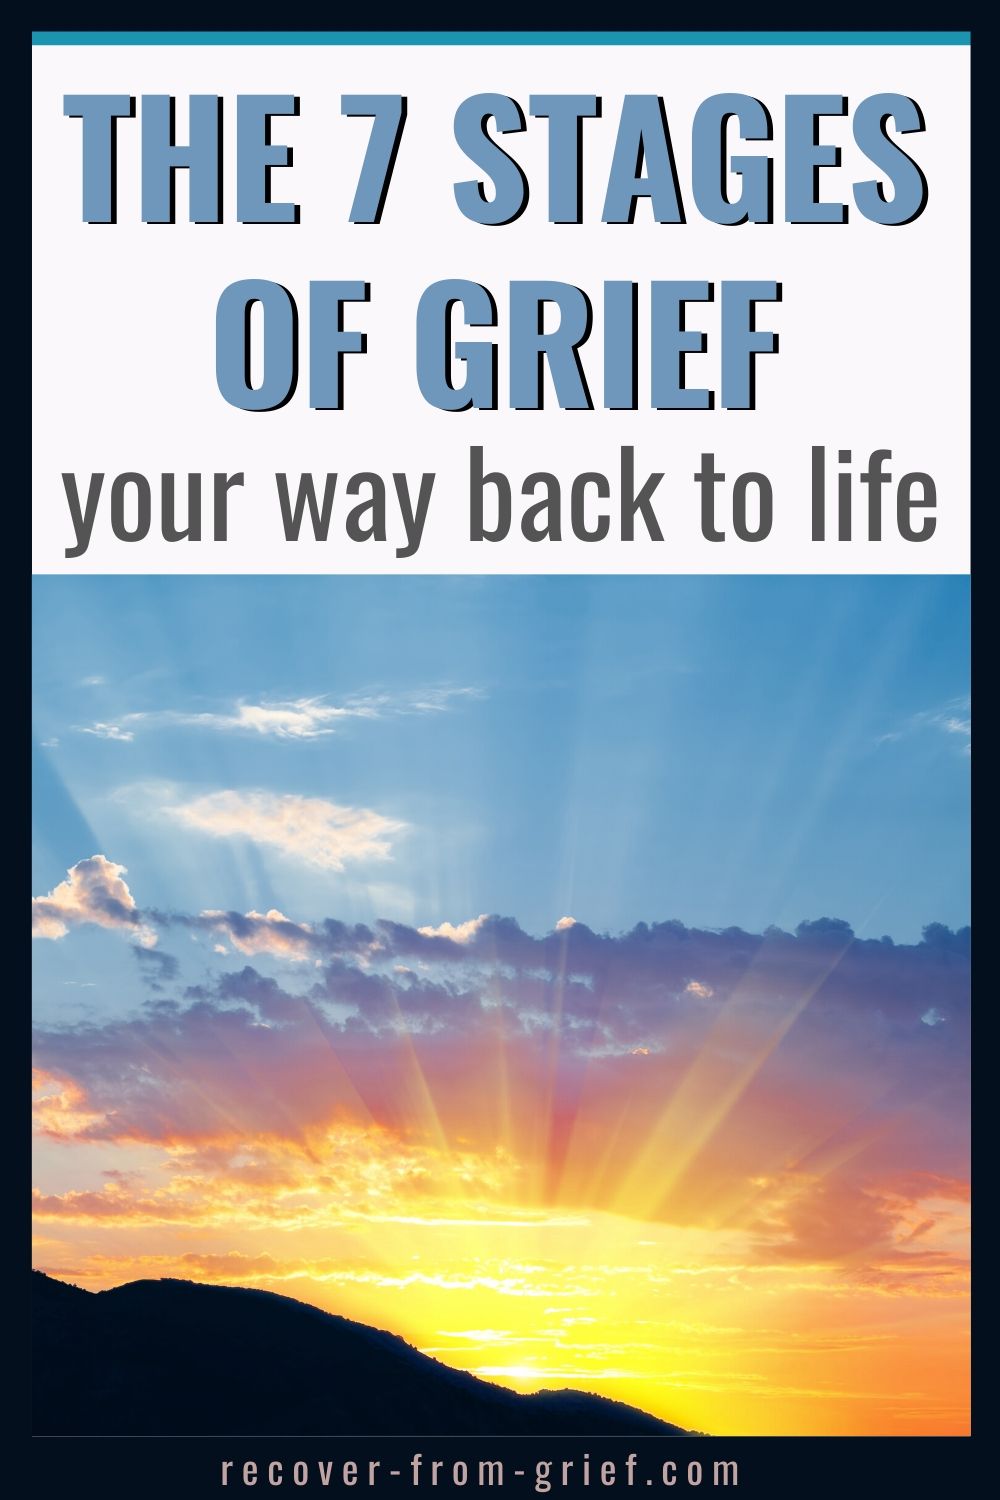 7 stages of grief pdf